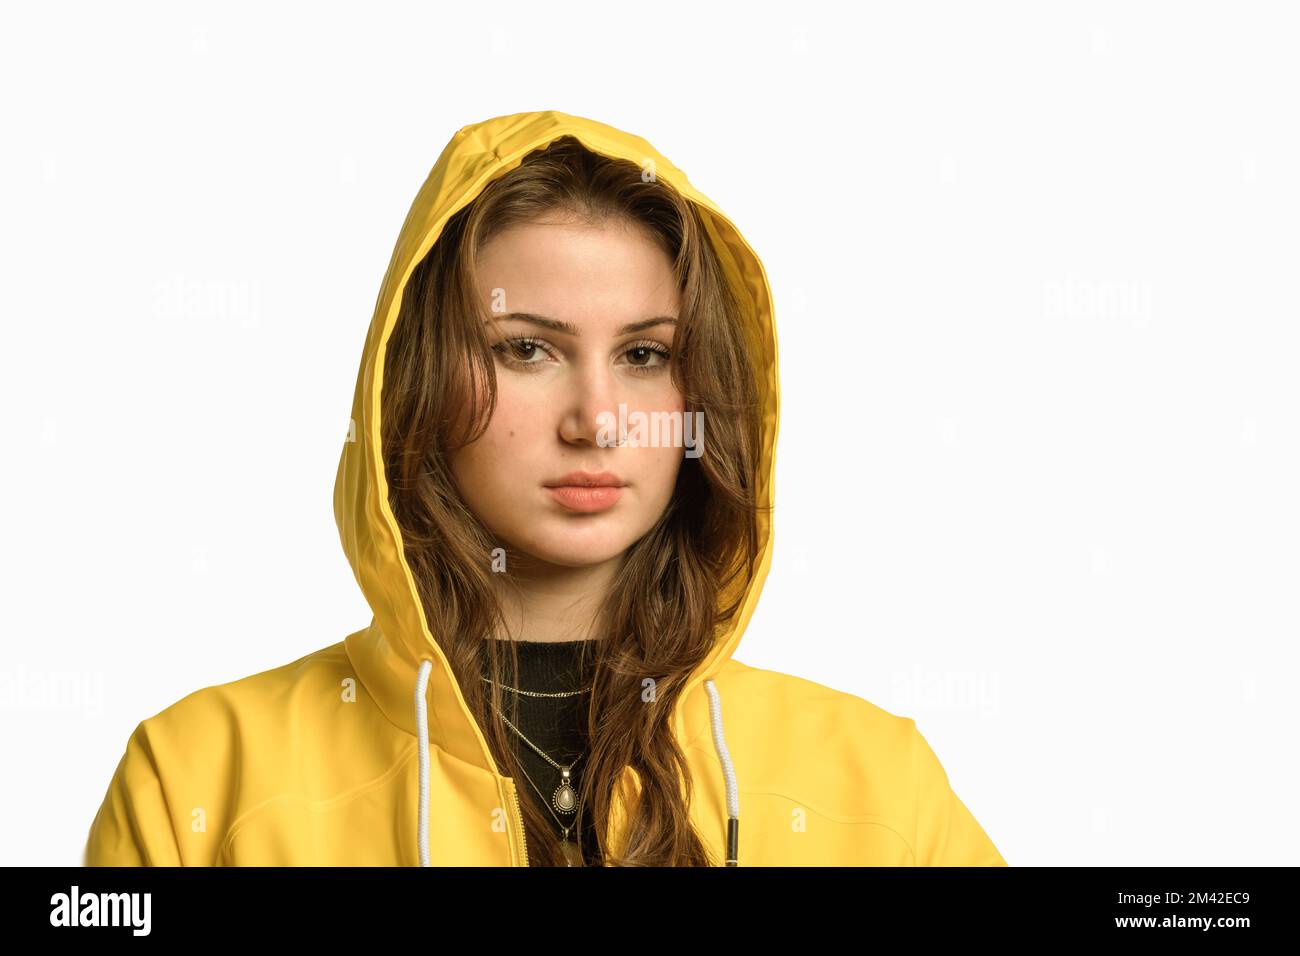 Long hair pretty young woman with noze ring. Covered head yellow raincoat with hood. isolated portrait. Stock Photo